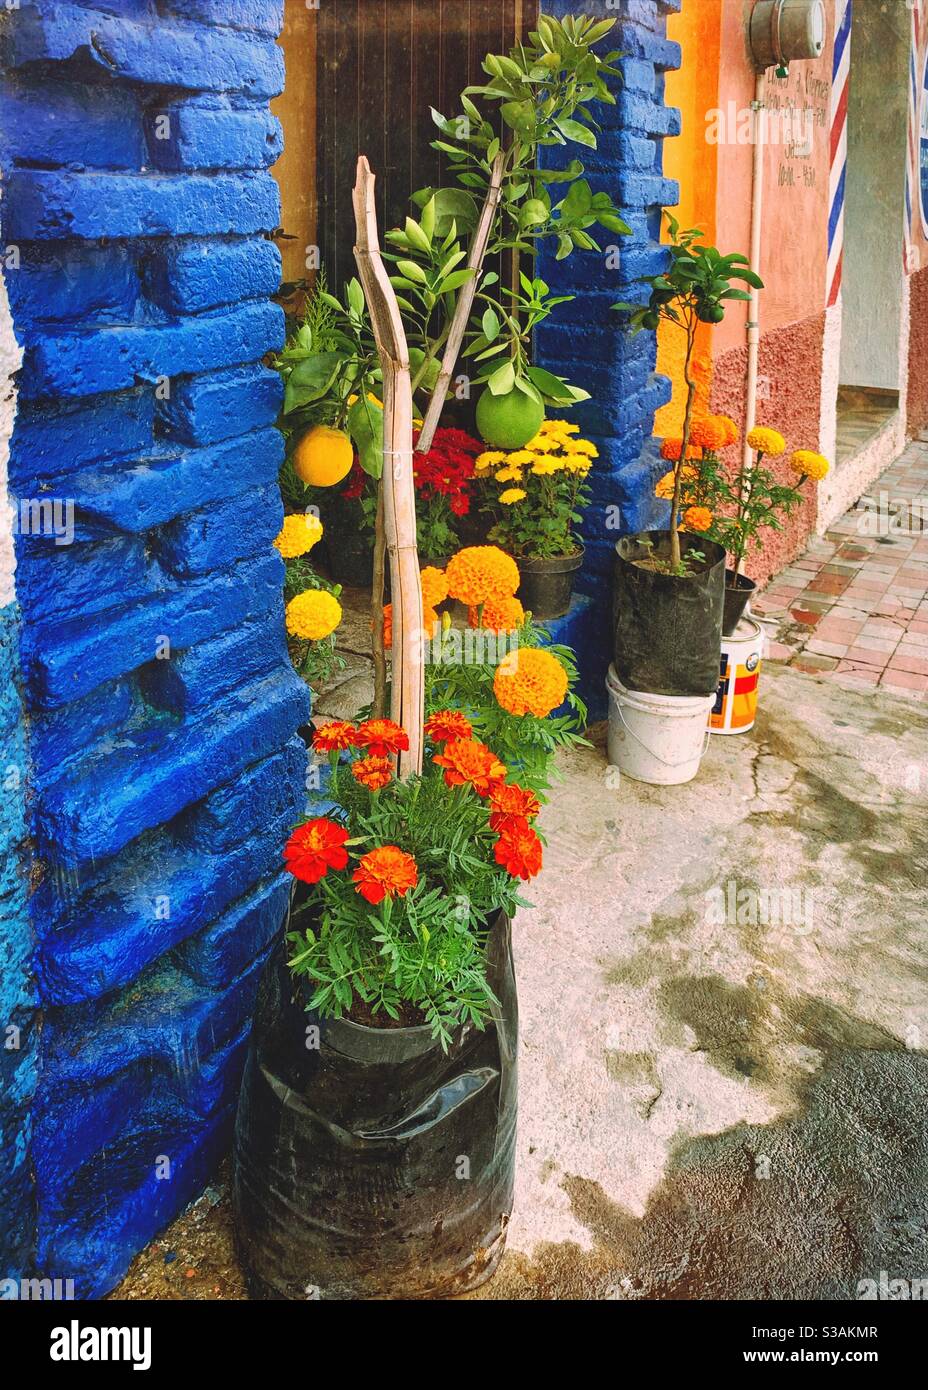 A display of colorful plants including marigolds for Day of the Dead create an inviting entrance into a store in Ajijic, México. Stock Photo